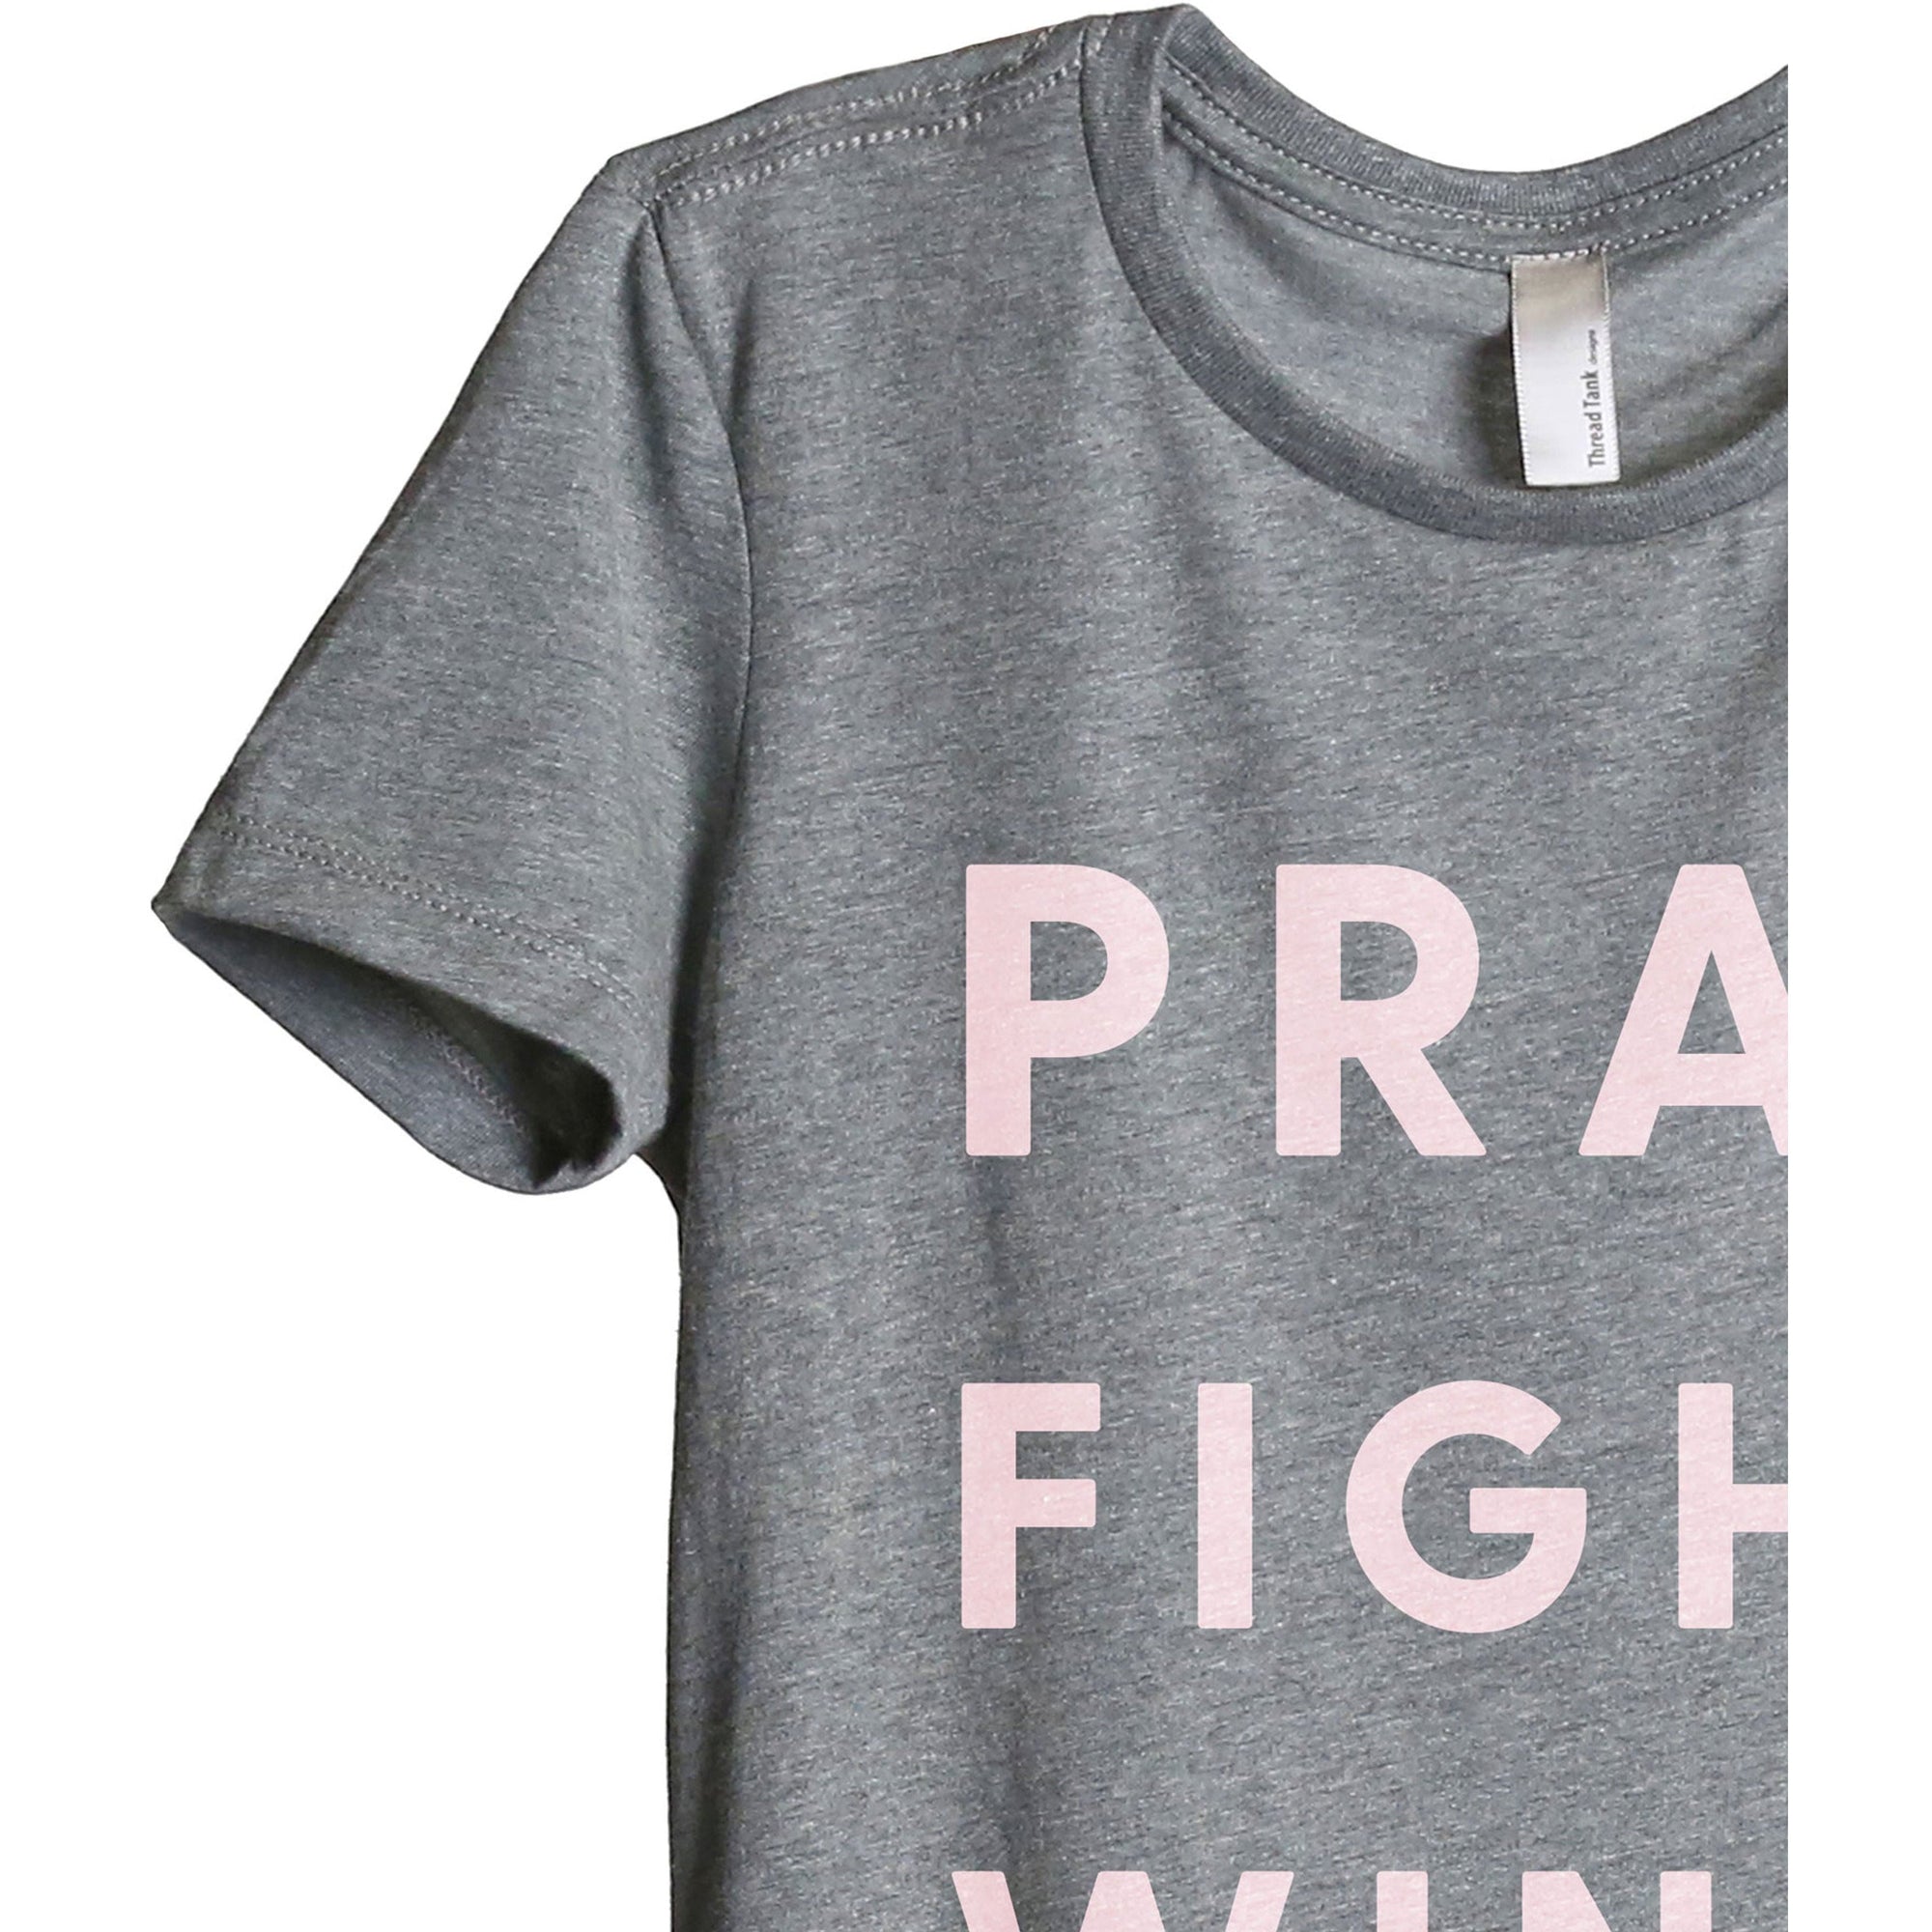 Pray Fight Win - Stories You Can Wear